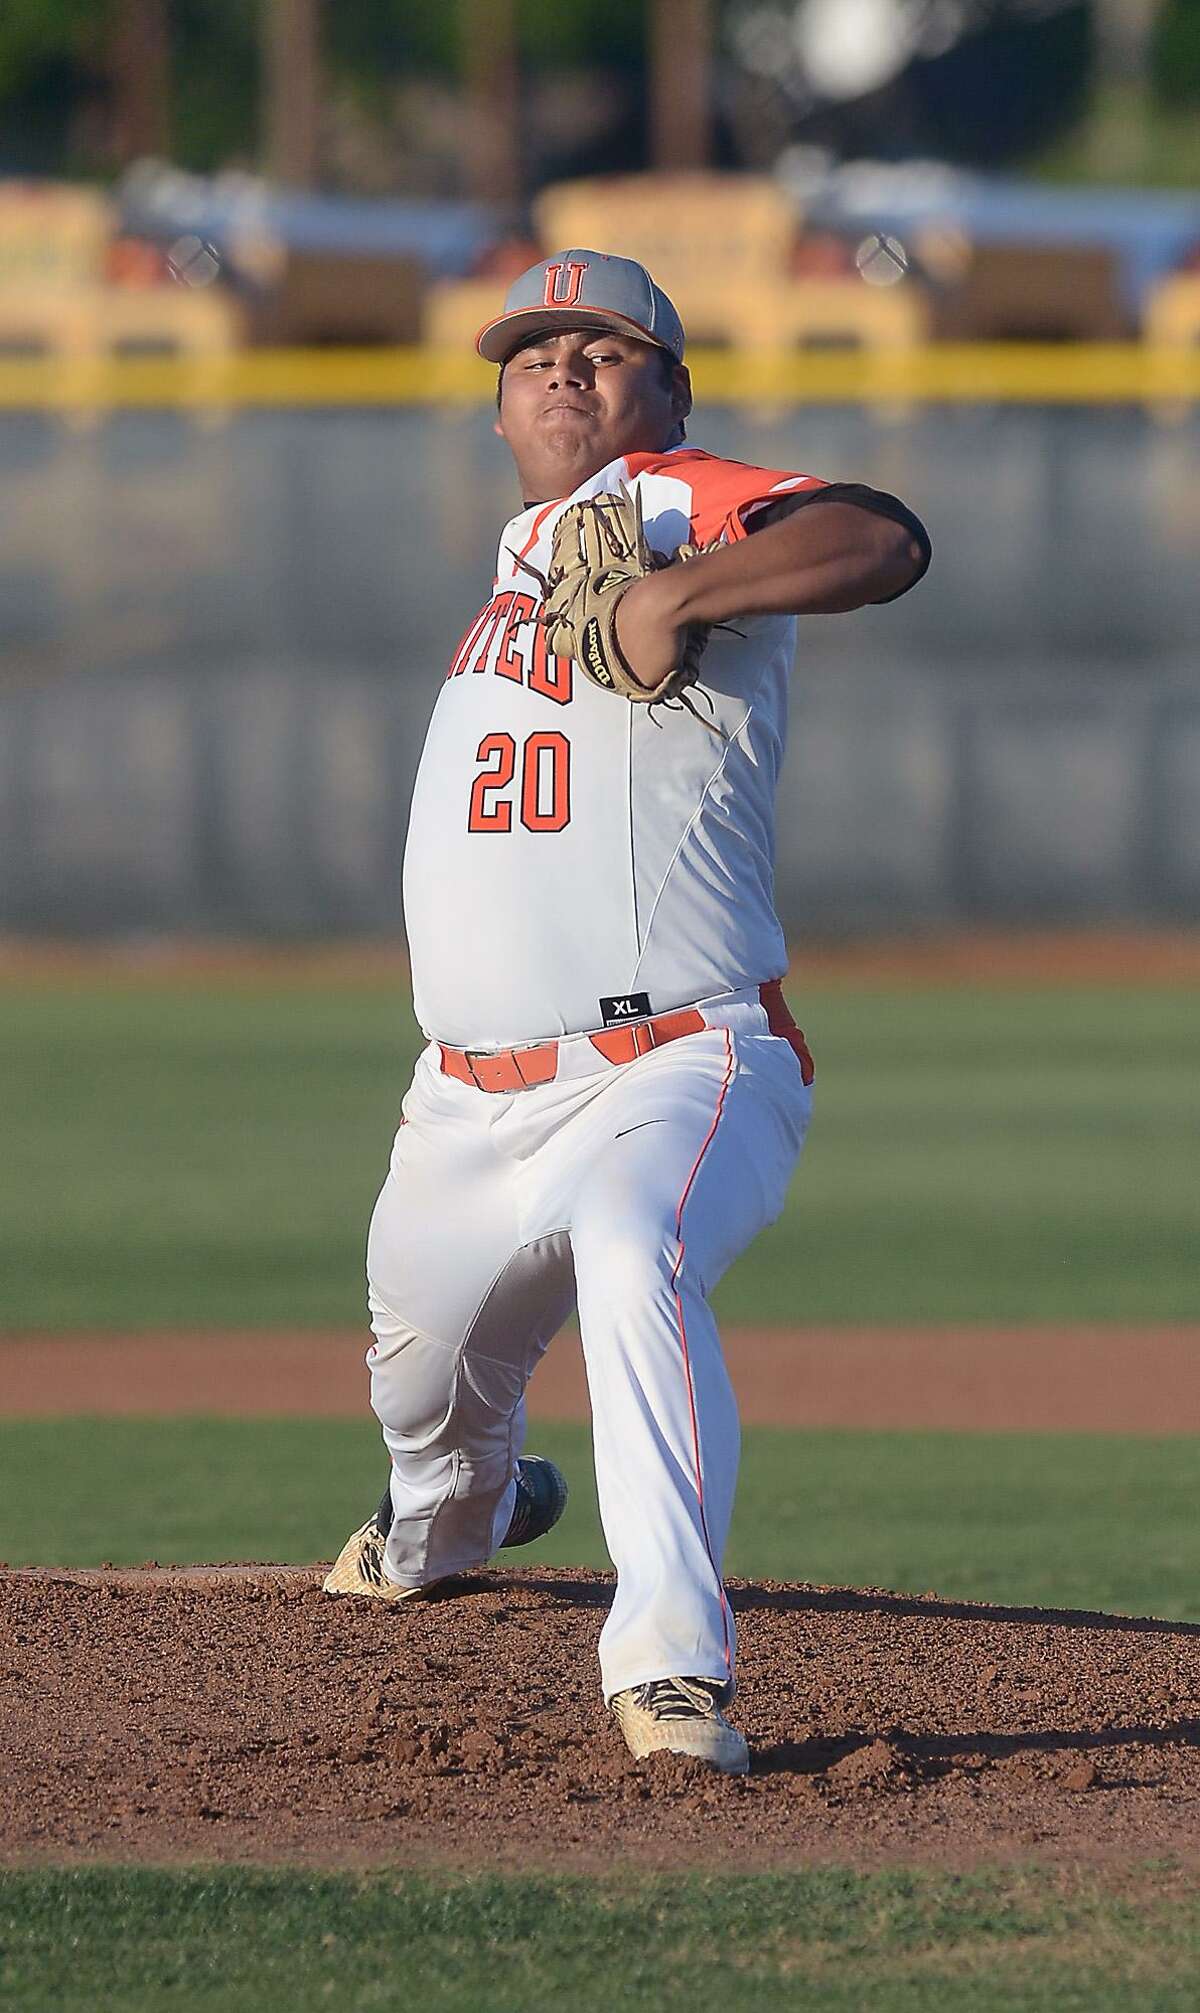 United starting pitcher Omar Cervantes was named first-team All-District.